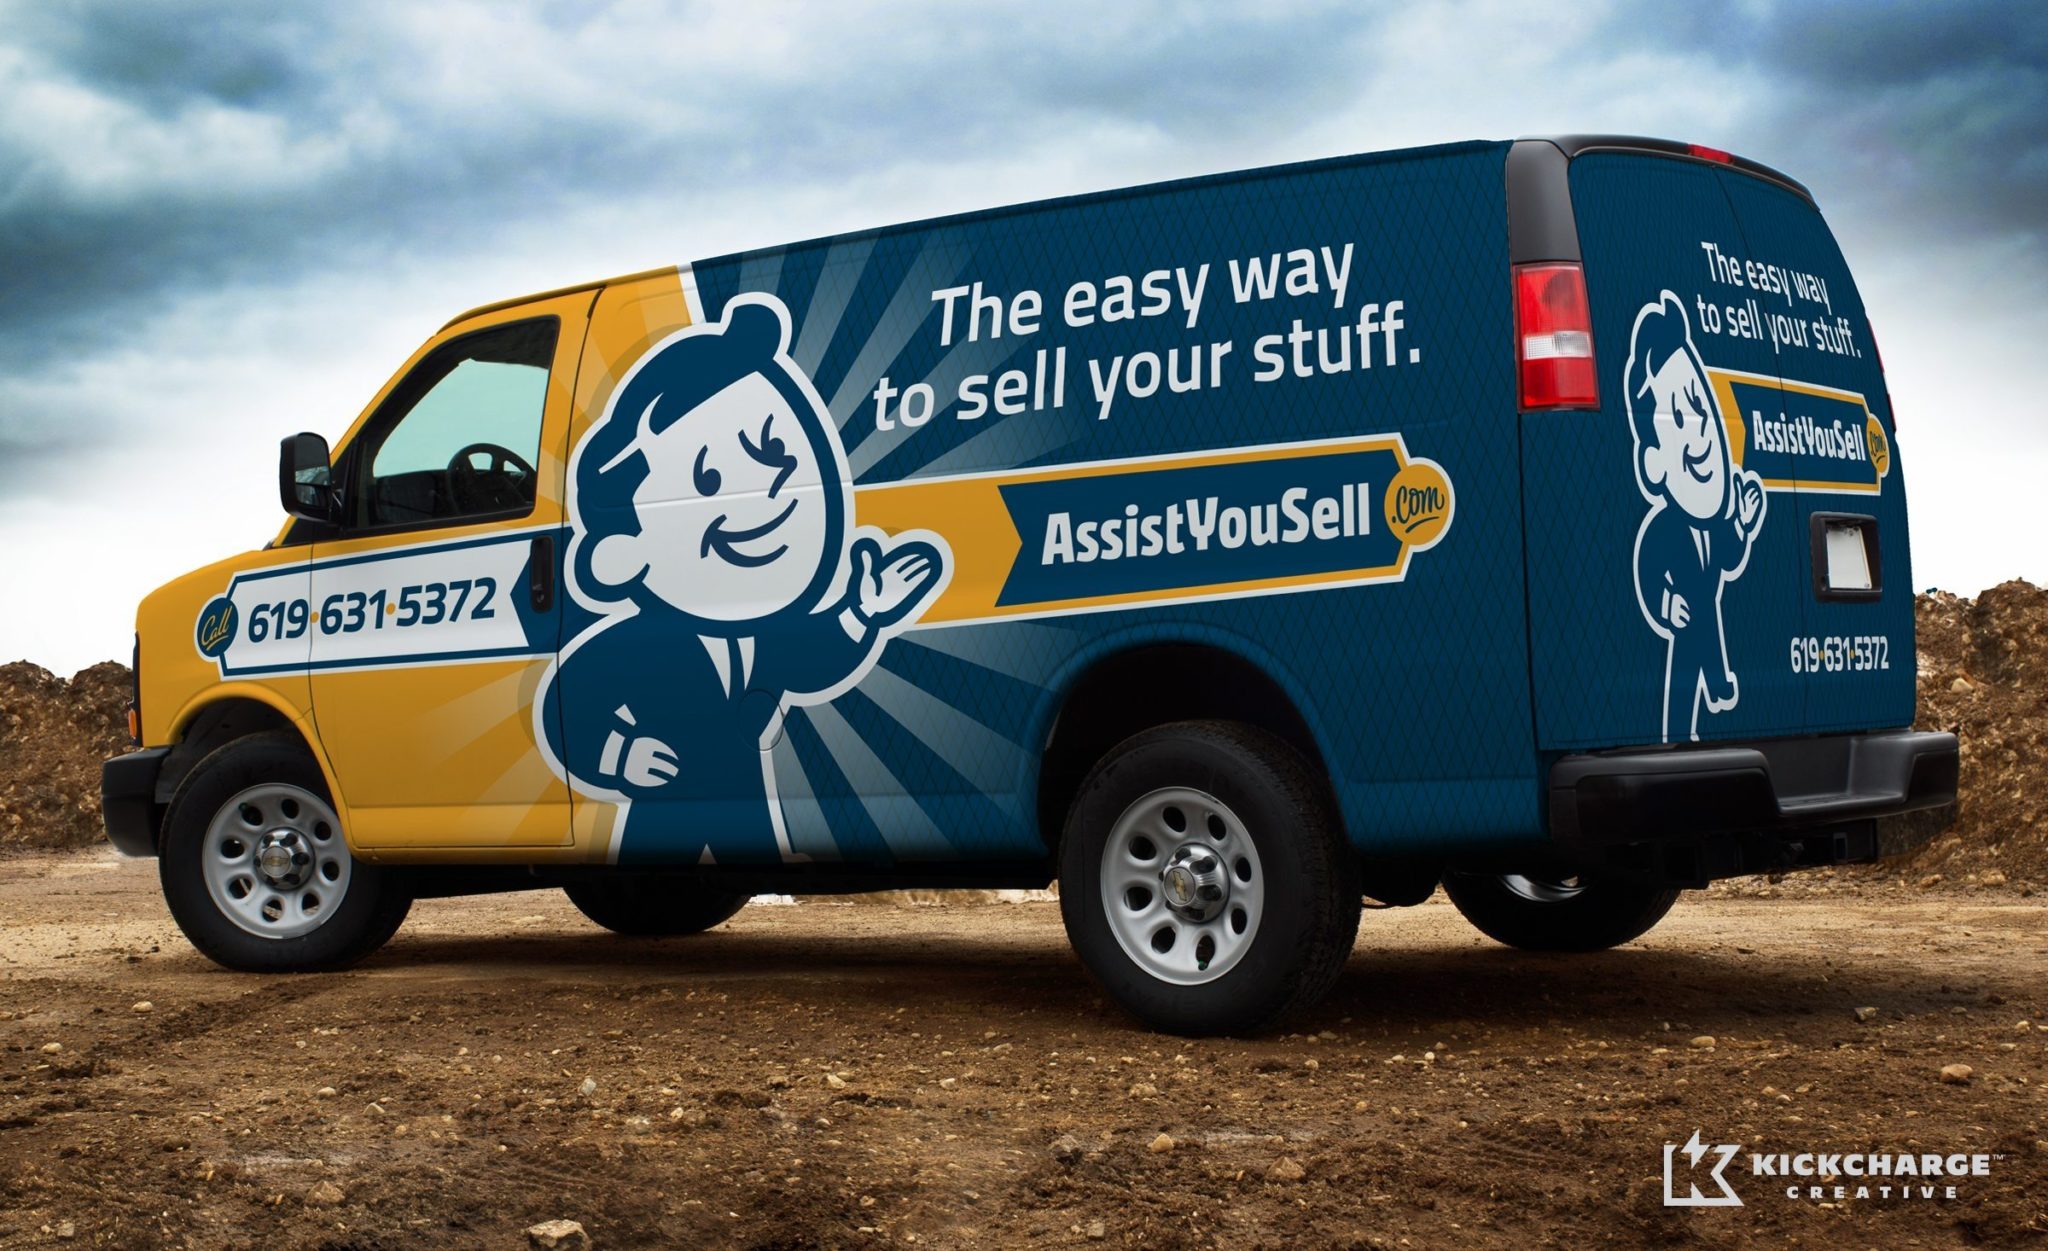 Brand identity and vehicle wrap design for an online marketplace.